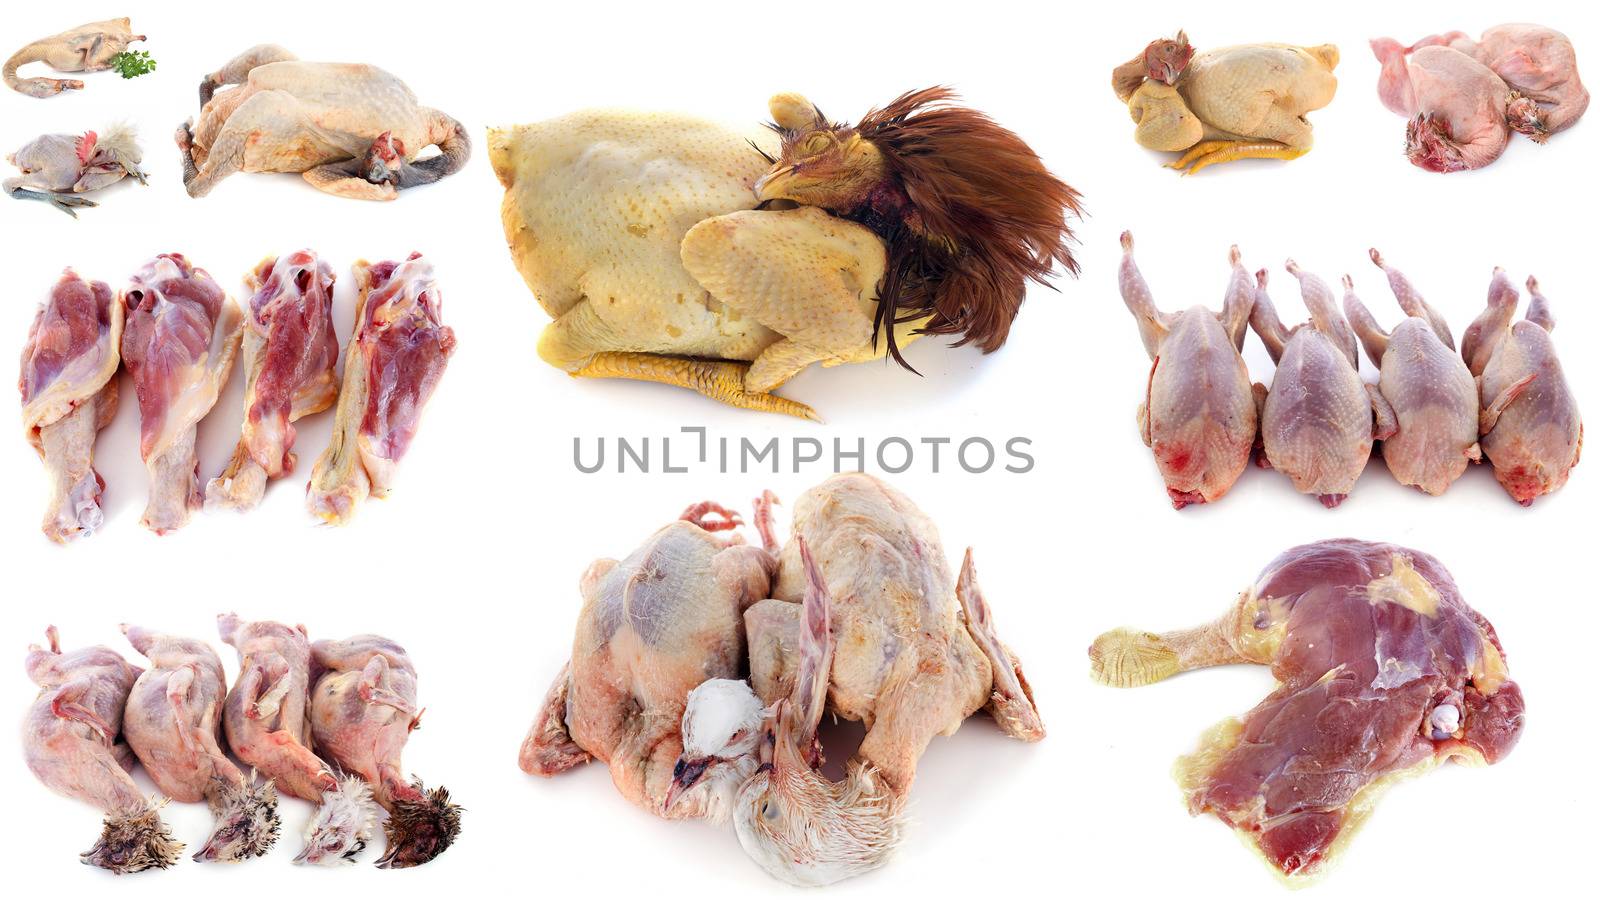 group of poultry meat by cynoclub